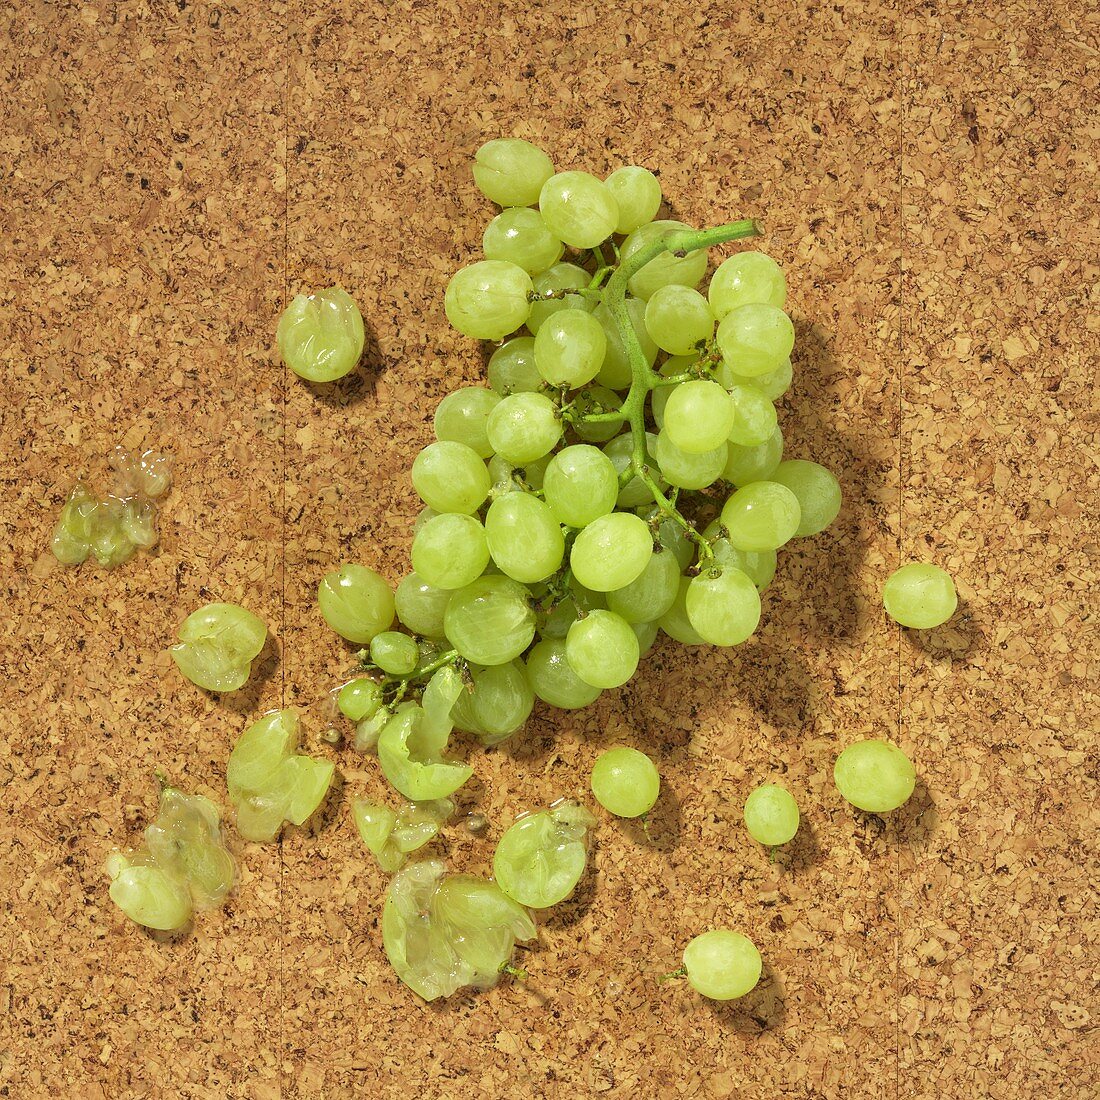 Squashed grapes